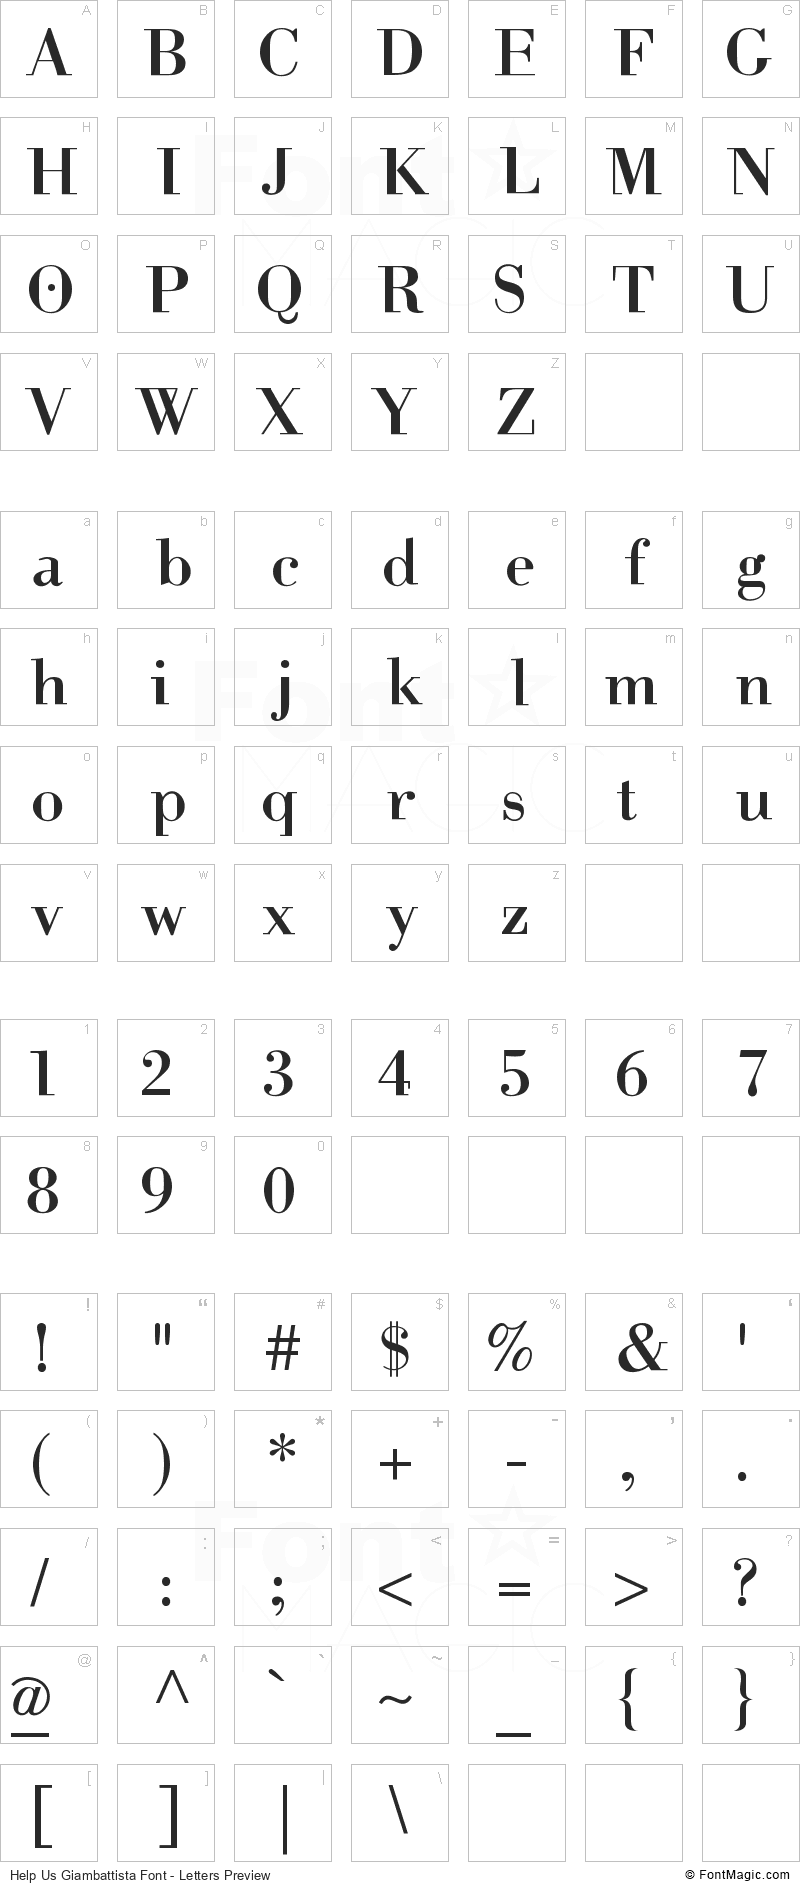 Help Us Giambattista Font - All Latters Preview Chart